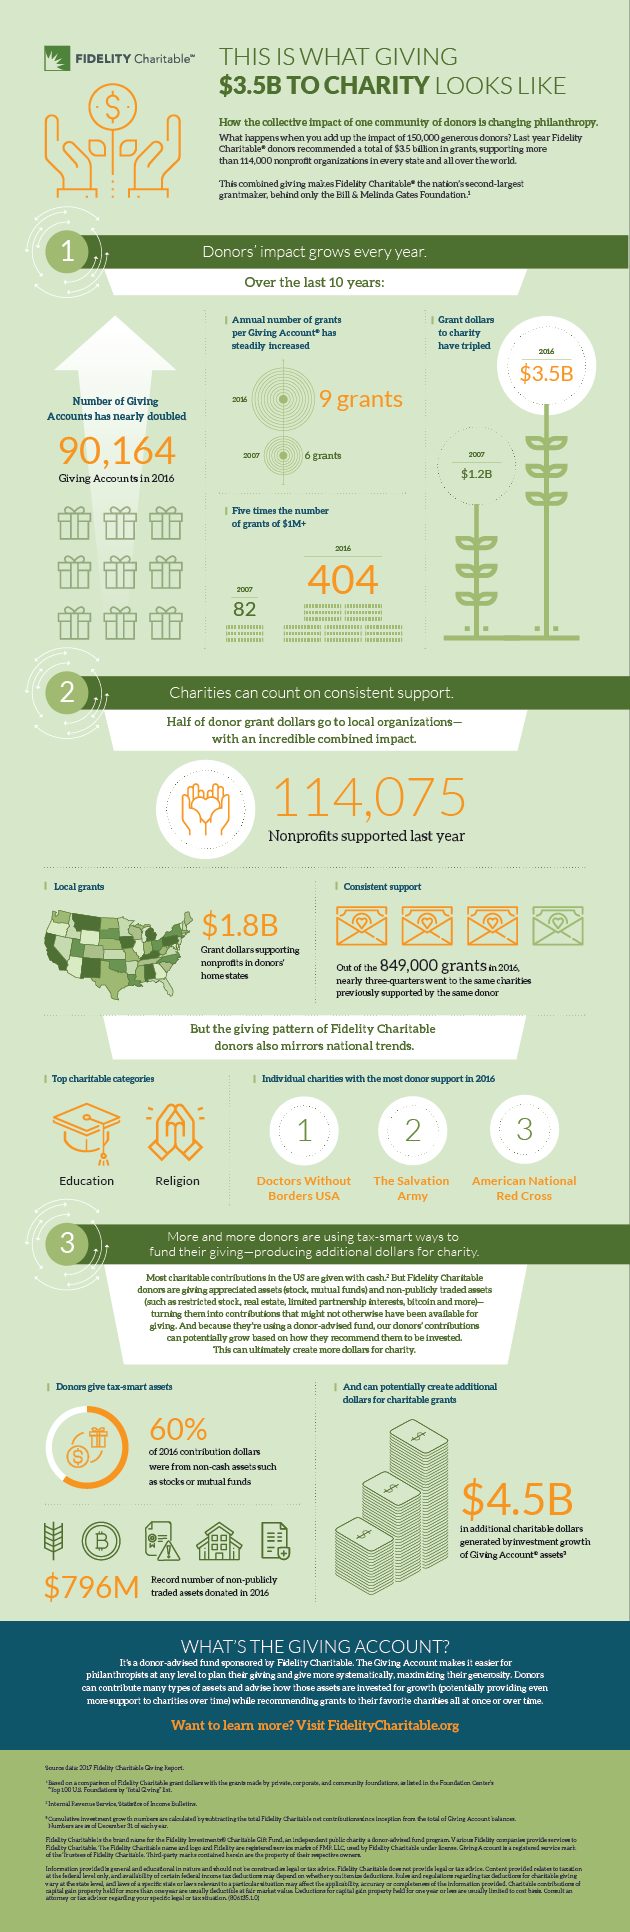 Our infographic shares how the collective impact of a community of donors is changing philanthropy.